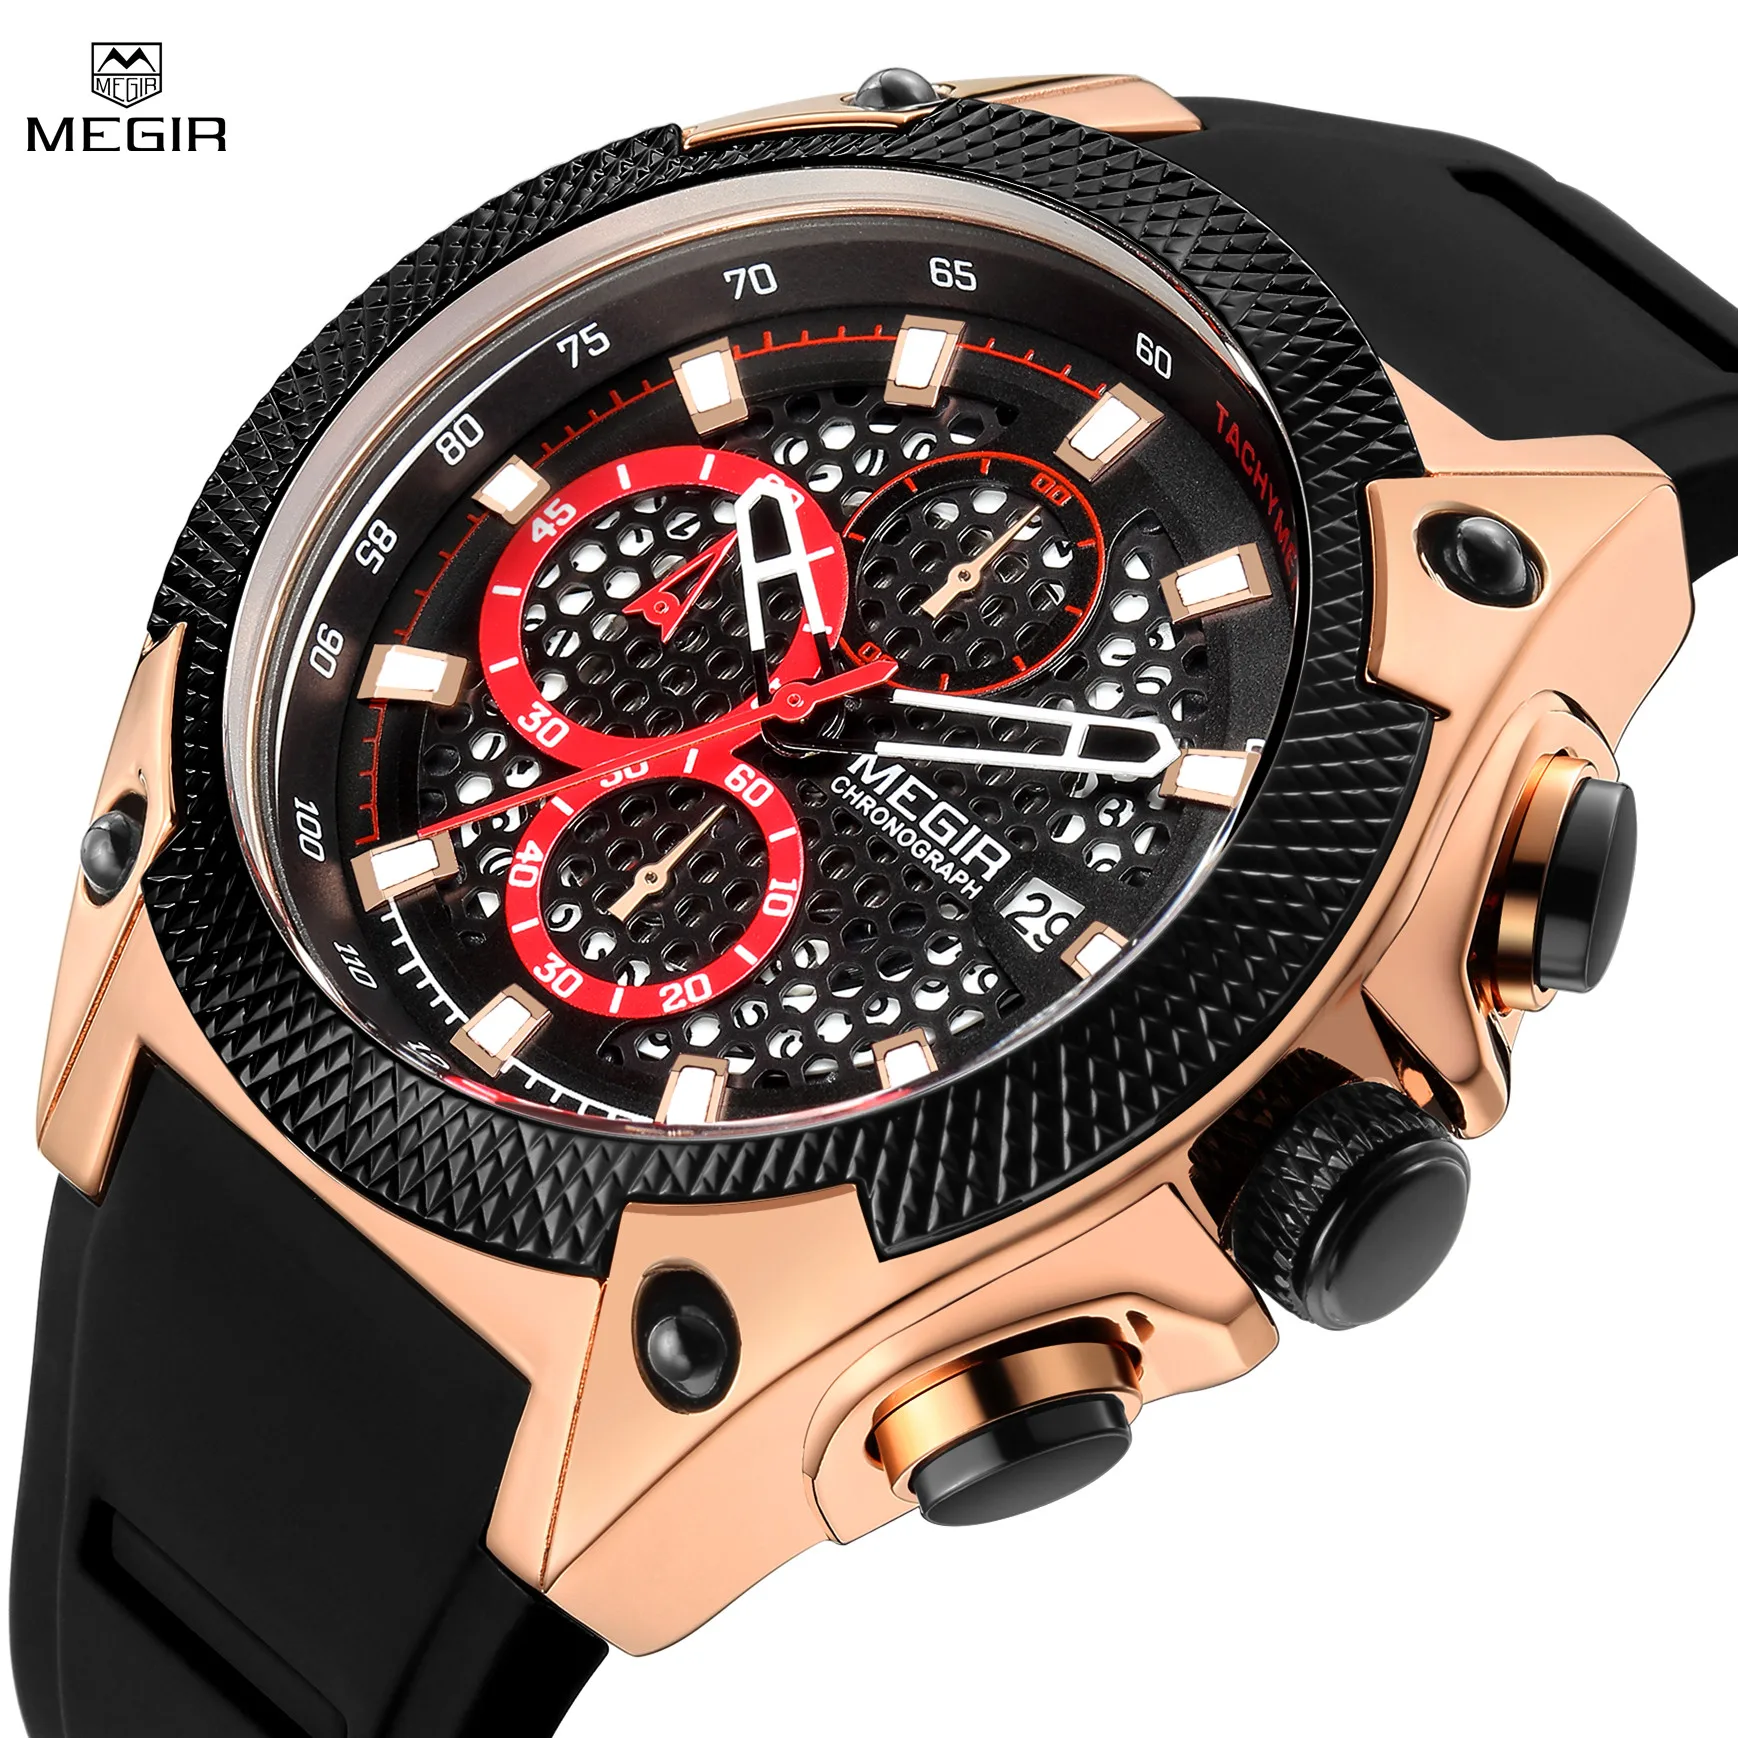 

MEGIR Fashion Sports Military Watches for Mens Top Brand Luxury Military Wristwatch Silicone Waterproof Clock Relogios Masculino